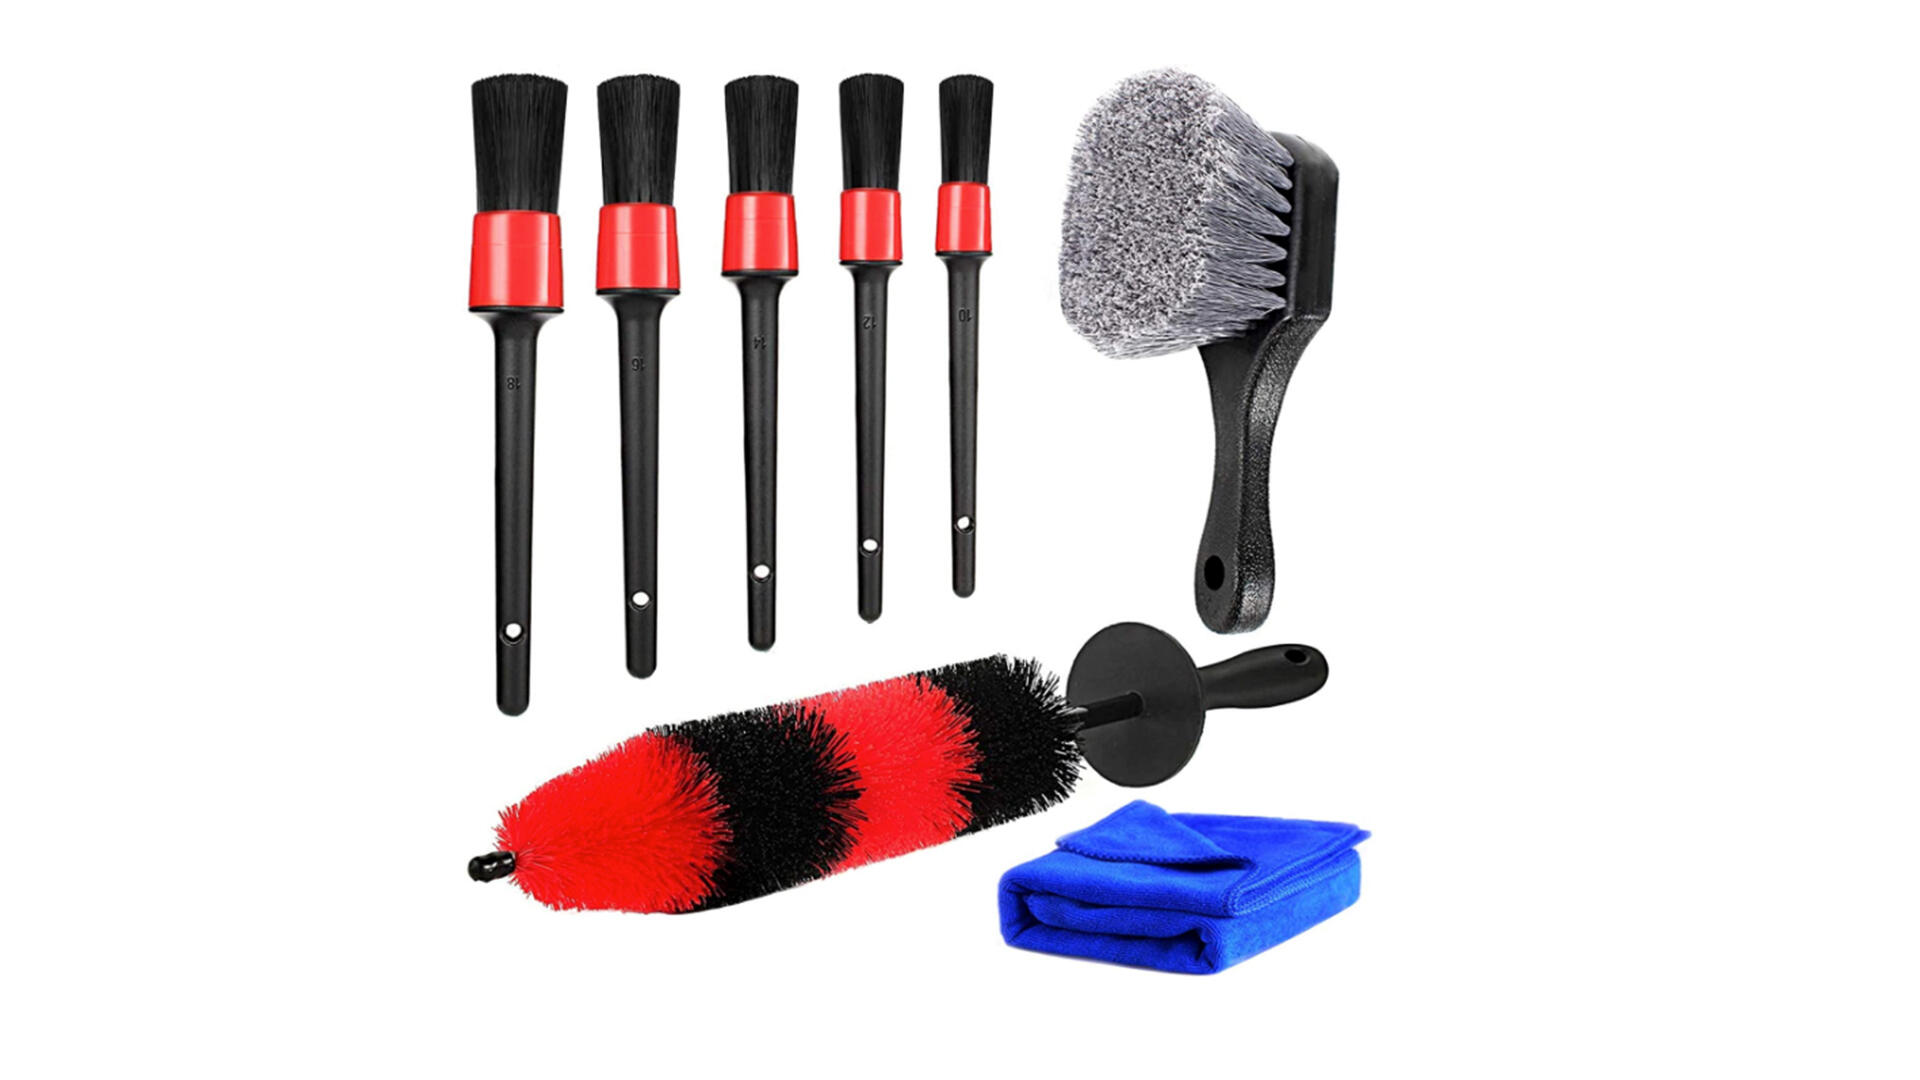 Car Detailing Tyre Wash Brush Wet and Dry for Auto Wheel Tire Rim Mud Brush  Wash Tools Car Hub Tyre Cleaner Brushes Accessories